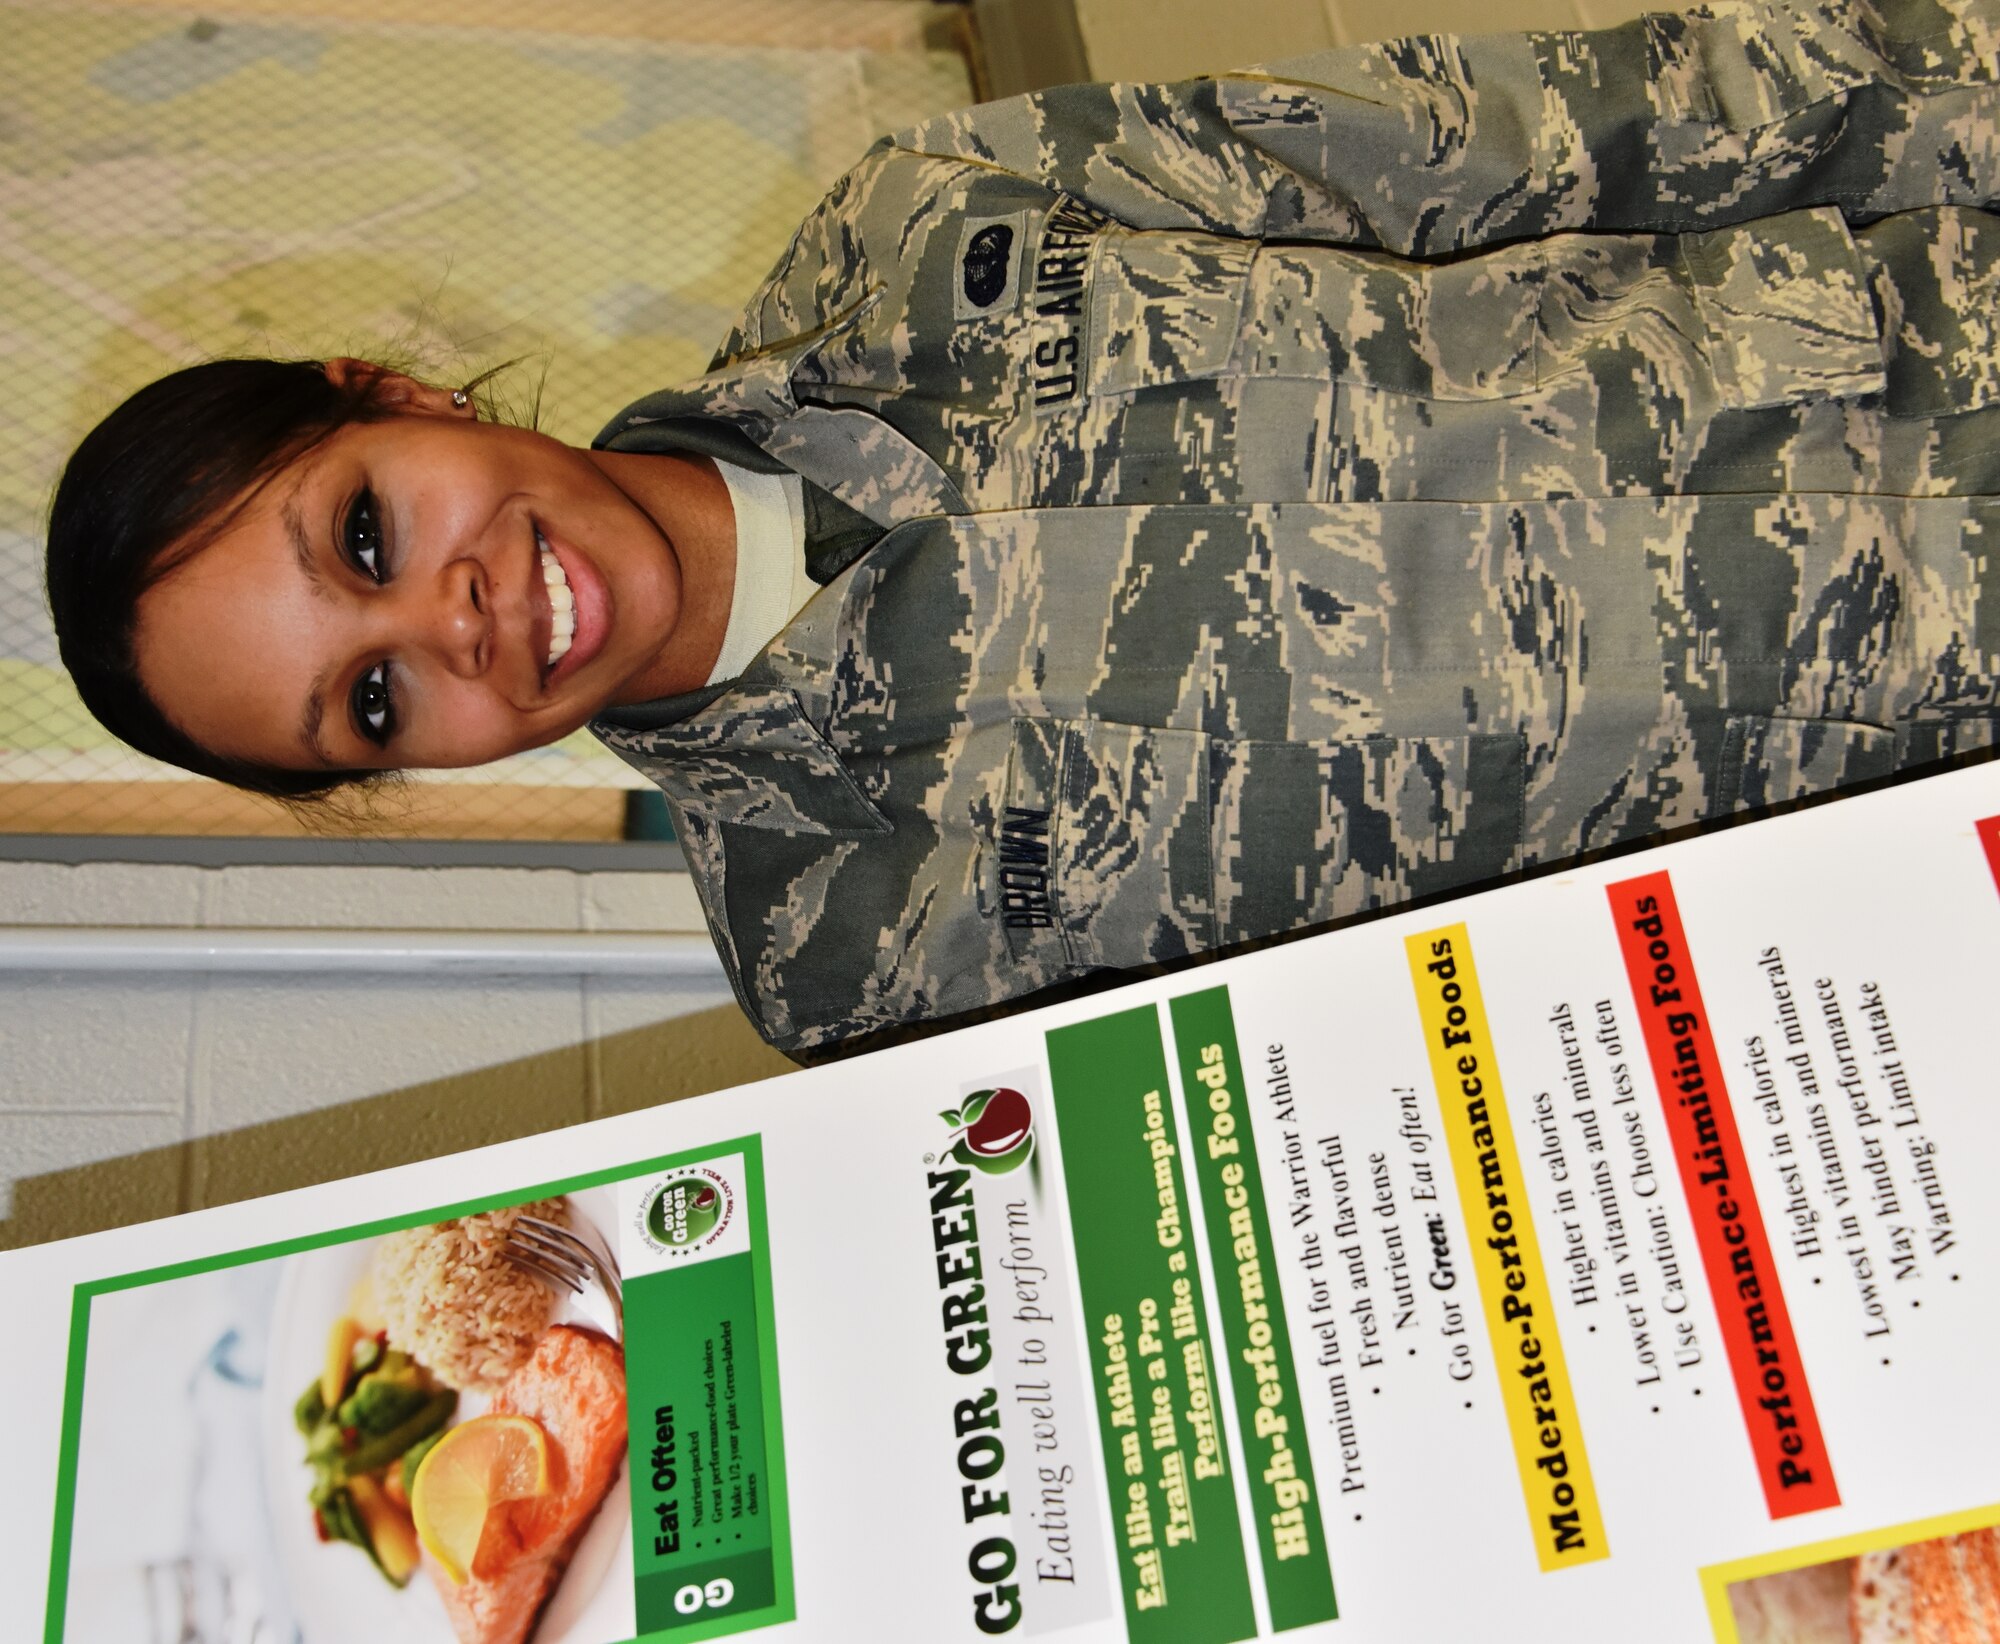 Airman 1st Class Robin Brown is the 175th Wing's March Airman Spotlight. She is a member of the 175th Force Support Squadron and is pictured with the Go For Green eating well program poster in the base dining facility. (U.S. Air National Guard photo by Senior Master Sgt. Ed Bard/RELEASED)